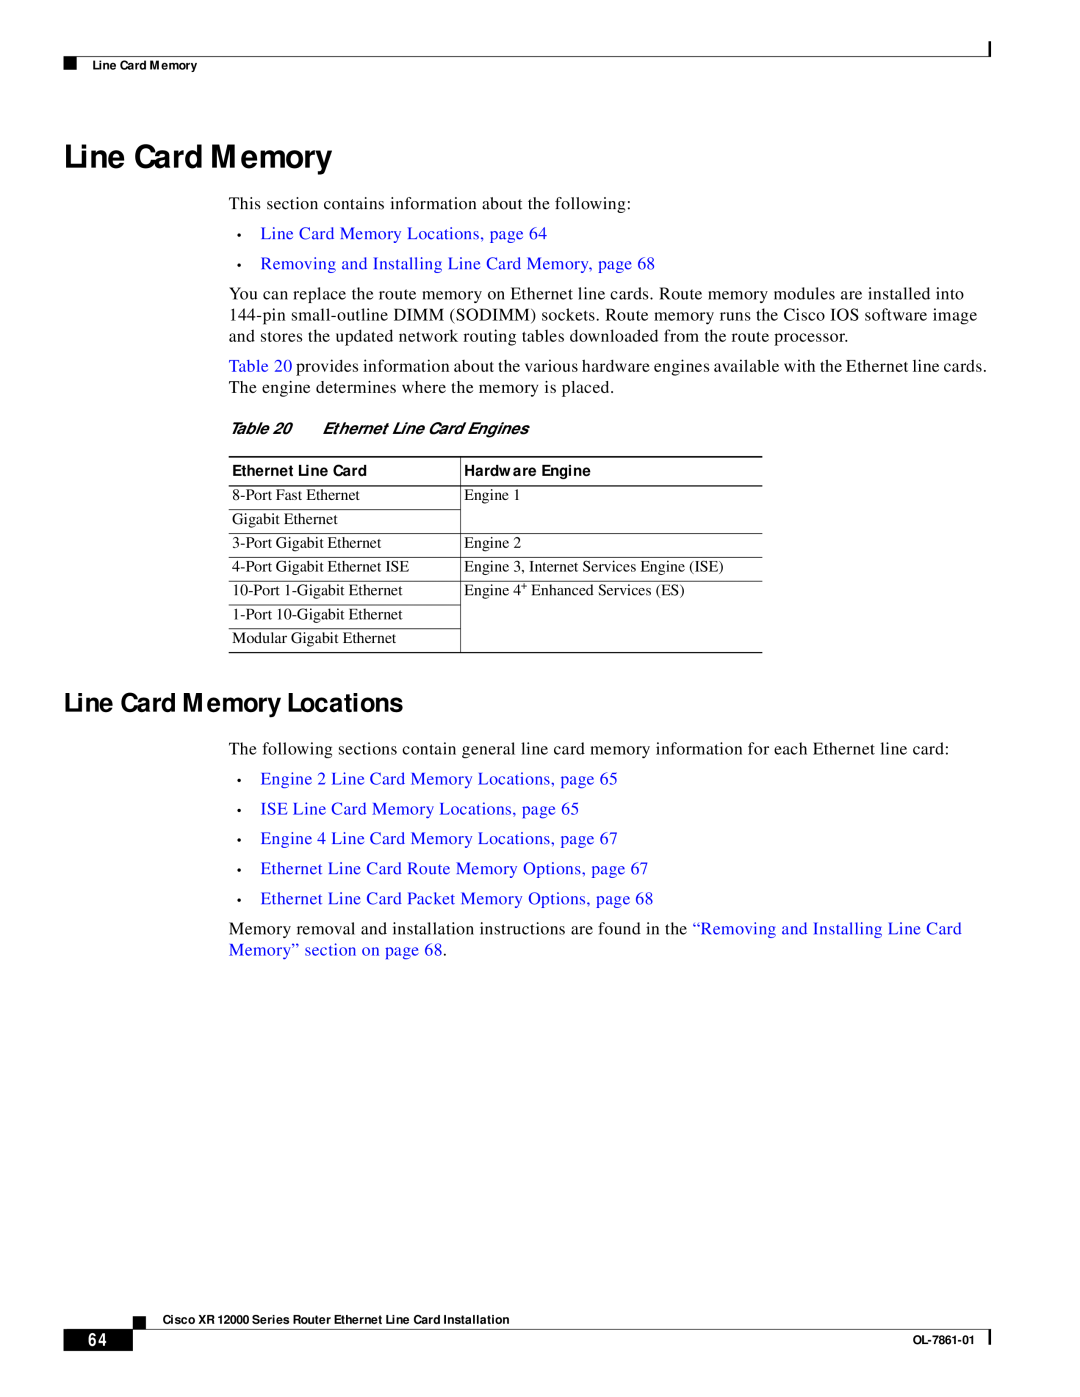 Cisco Systems OL-7861-01 manual Line Card Memory Locations, page, Removing and Installing Line Card Memory, page 